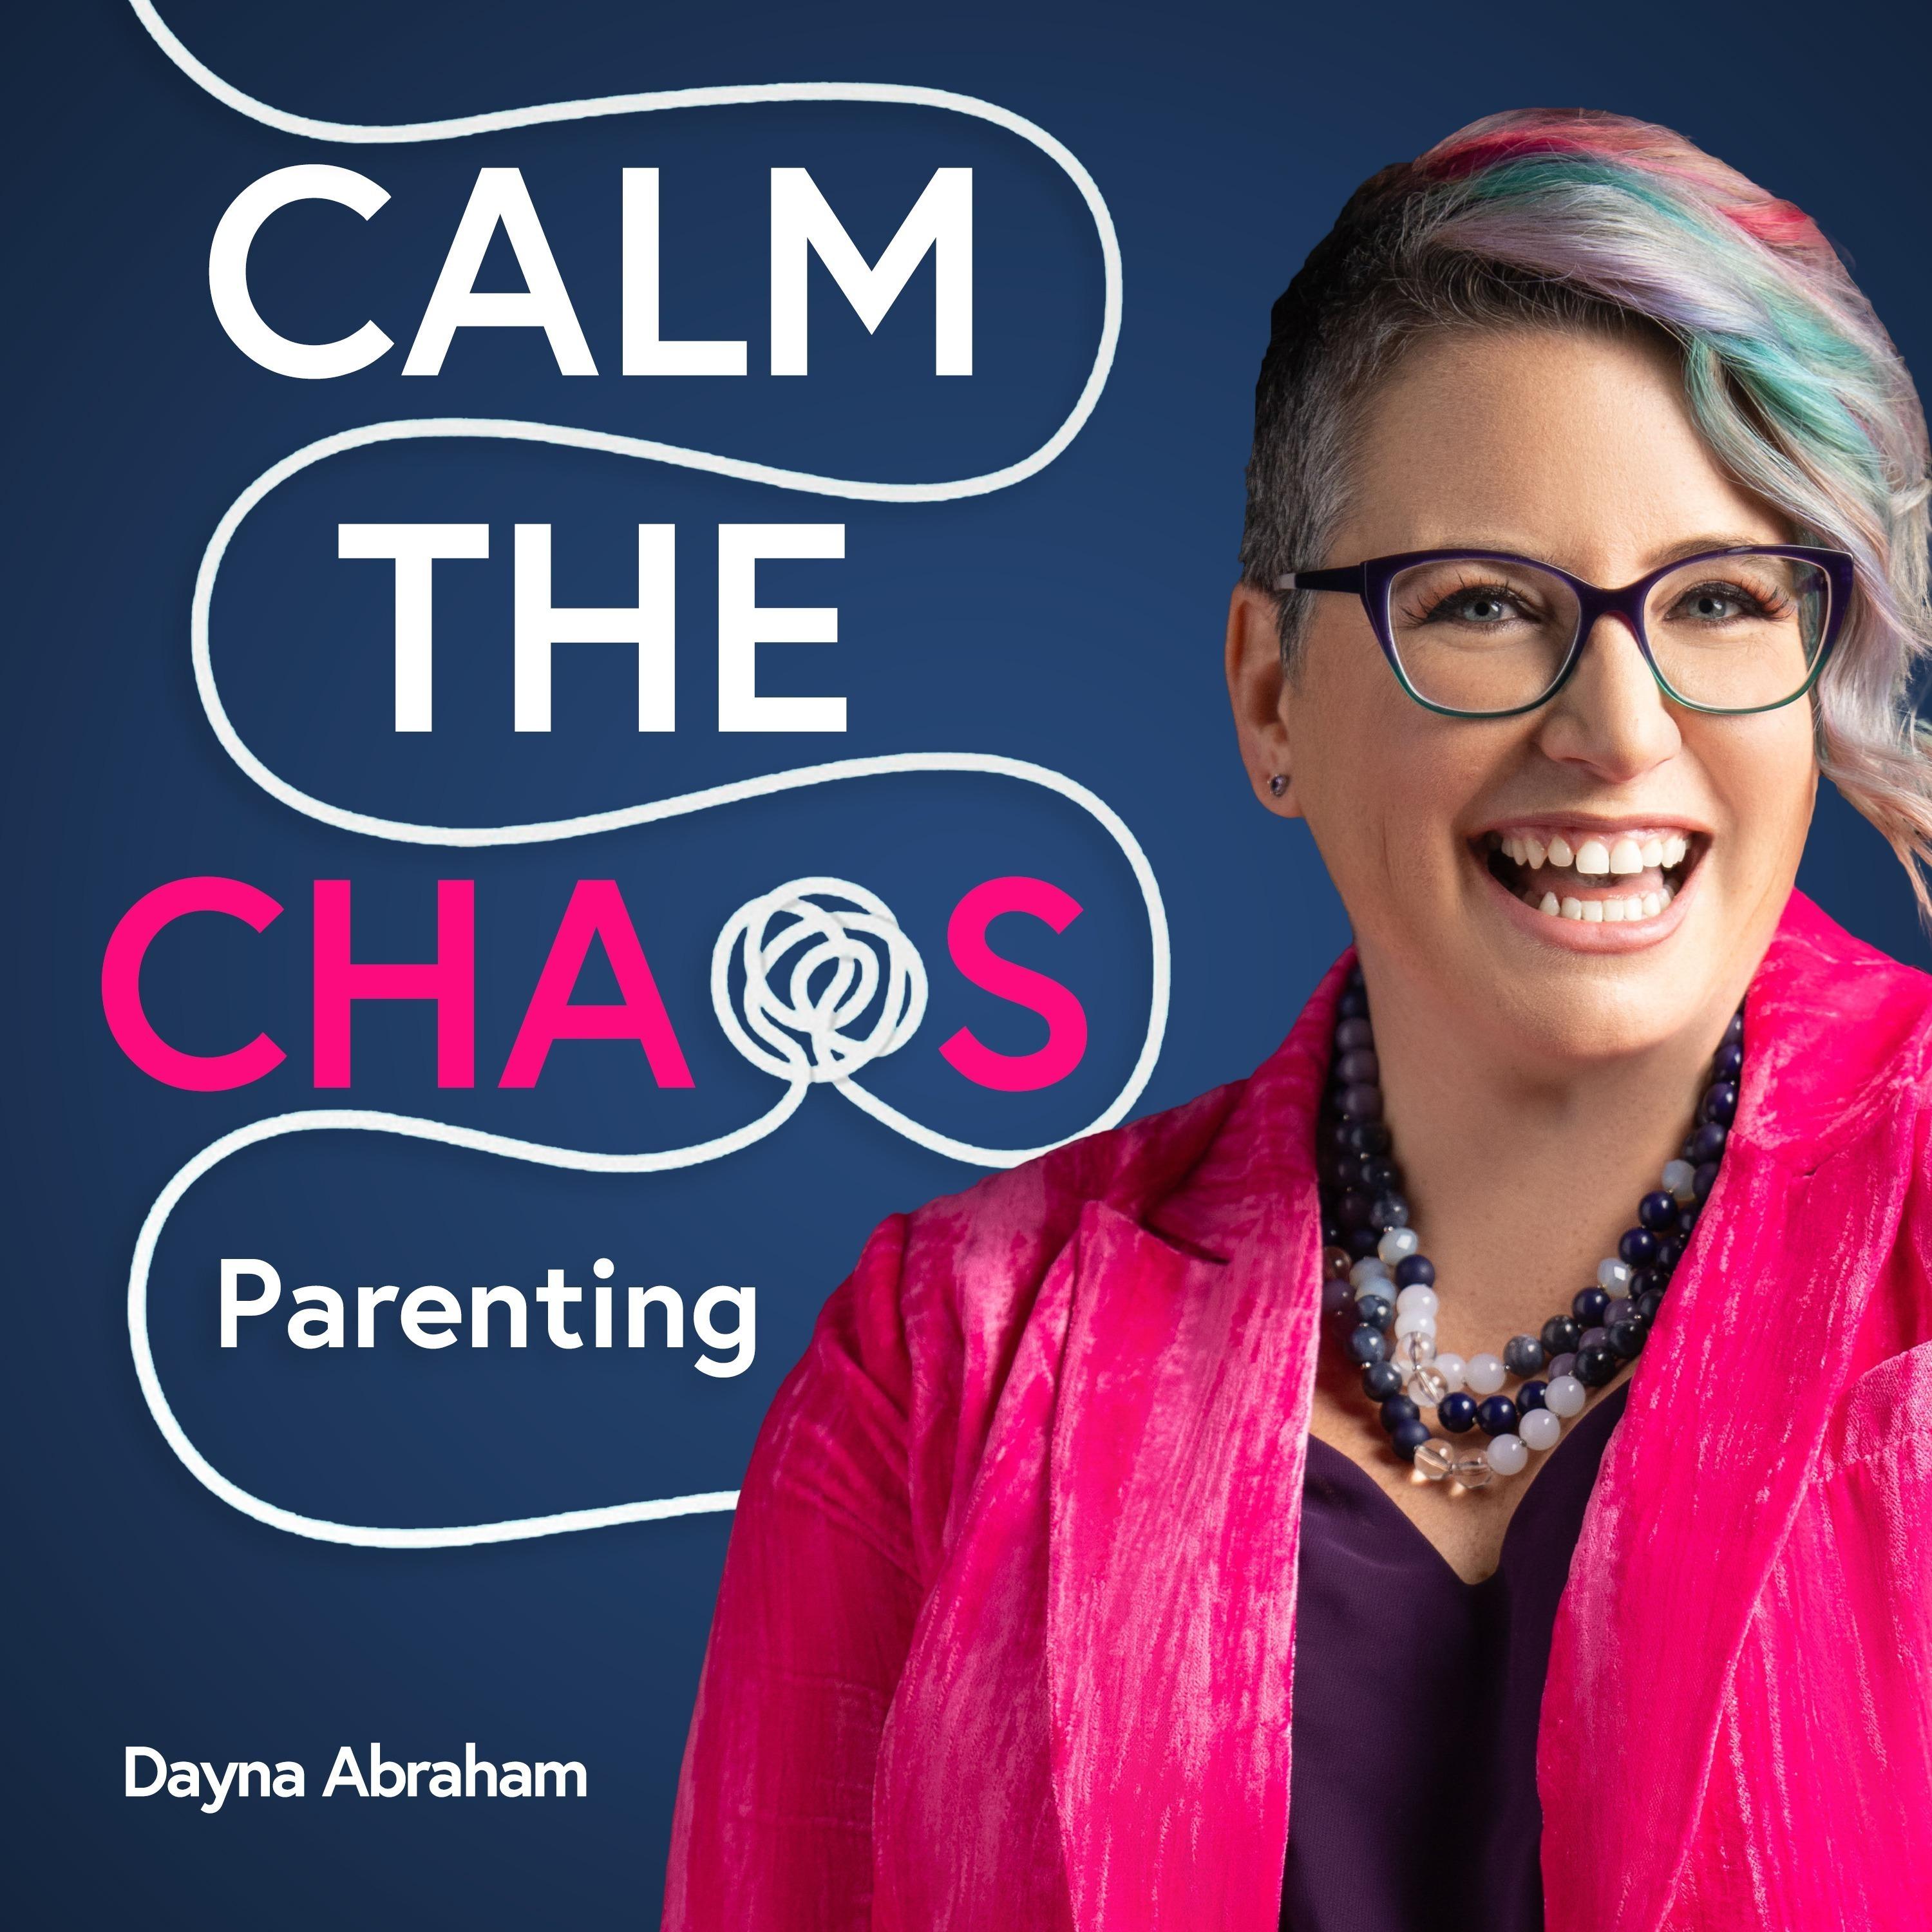 Calm the Chaos Parenting